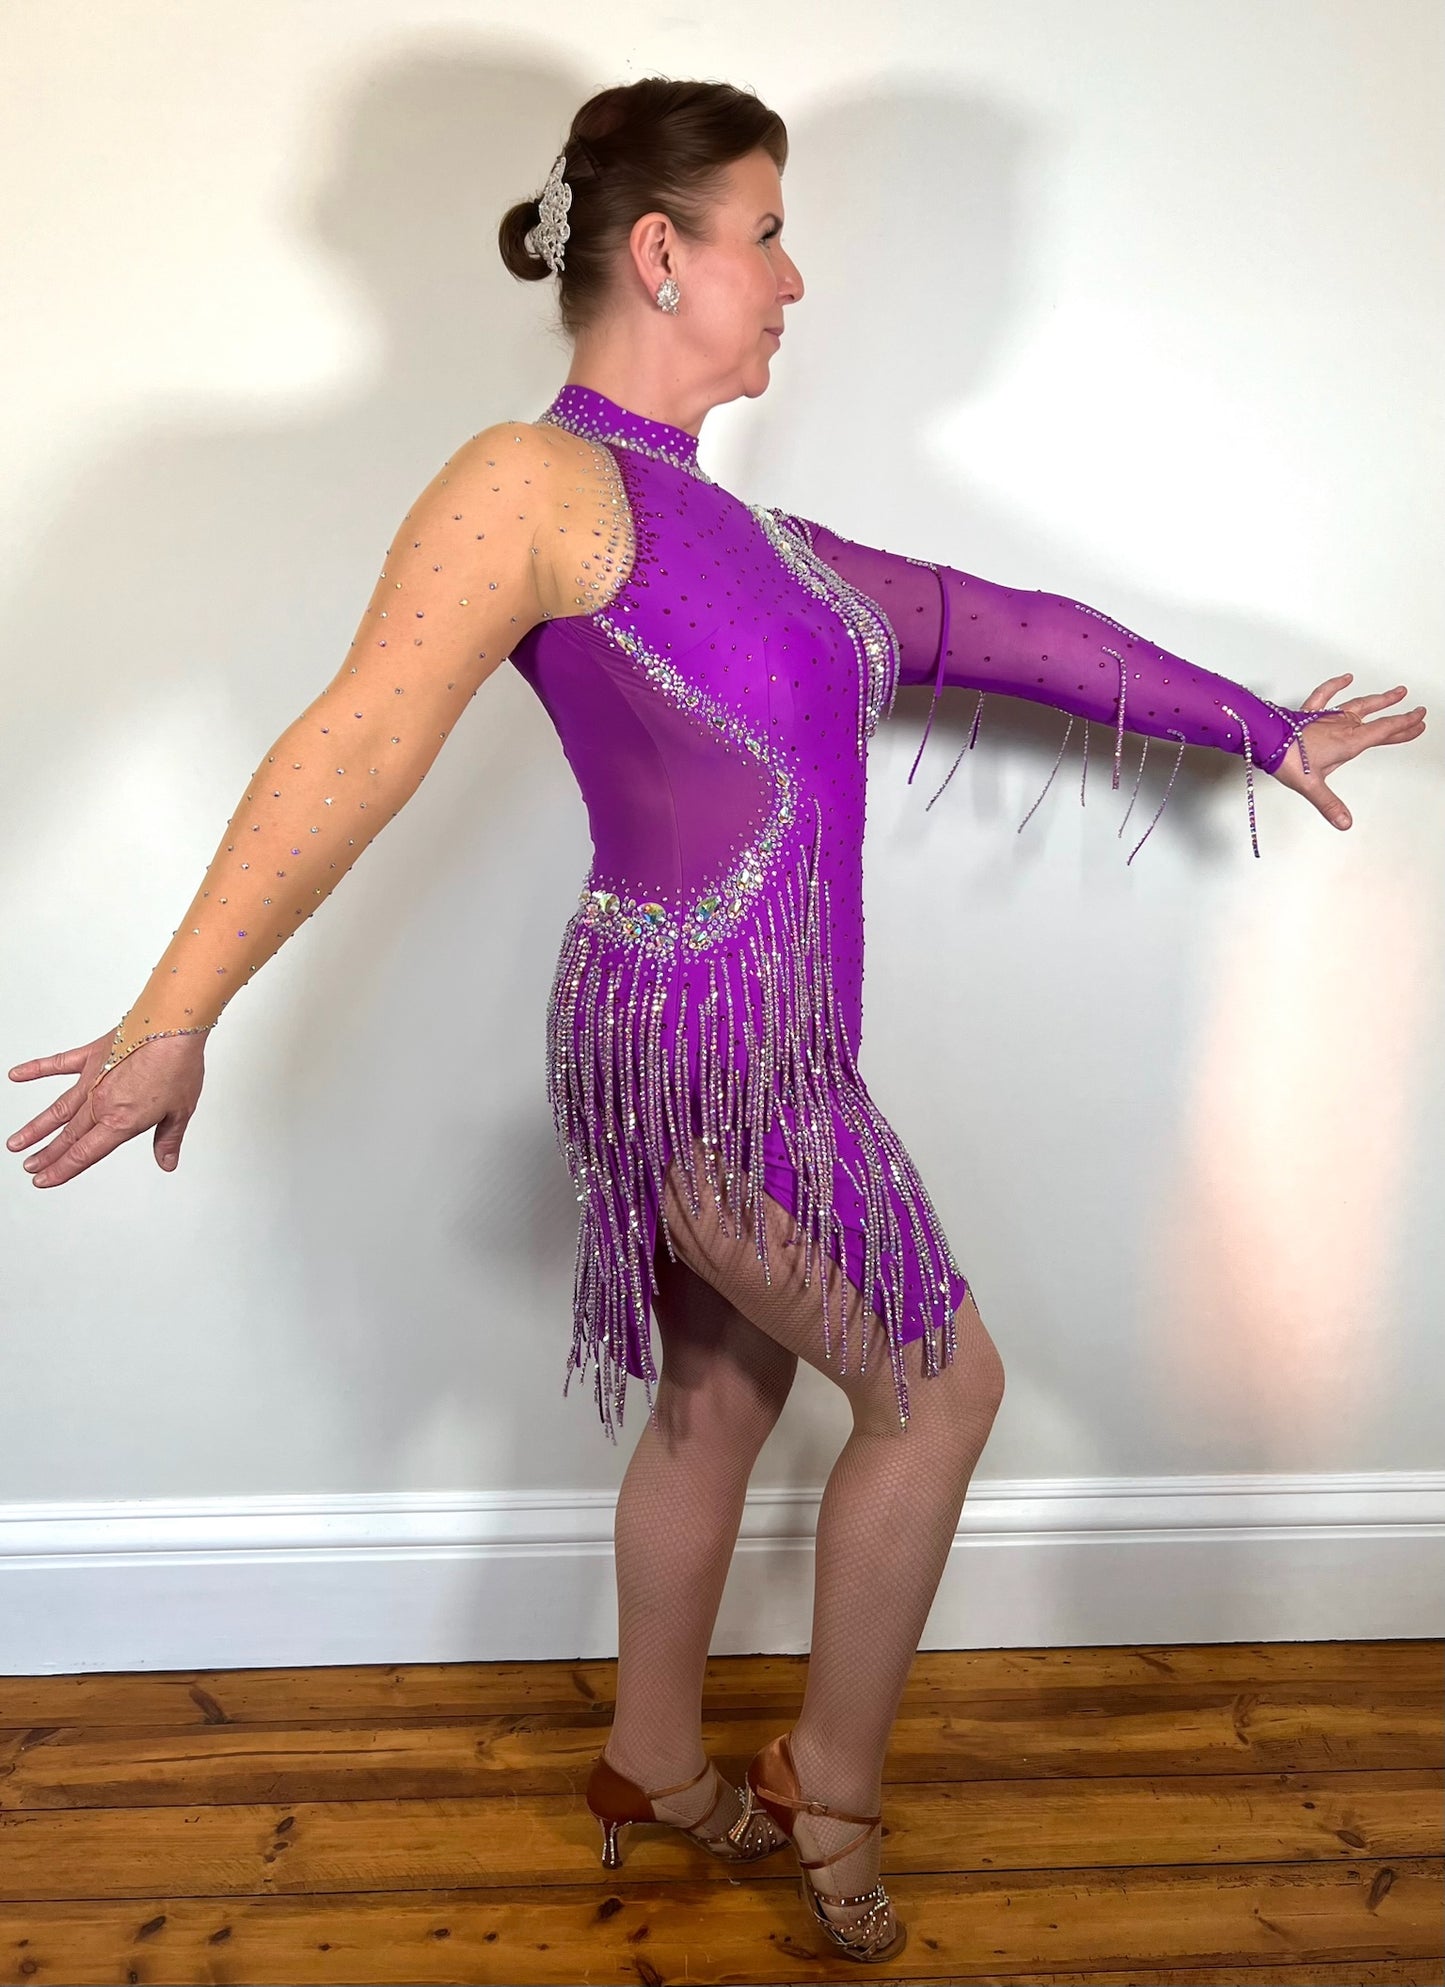 060 Bright Magenta Competition Latin Dance Dress. Flesh sleeve to one arm. Stoned dropper detailing throughout.